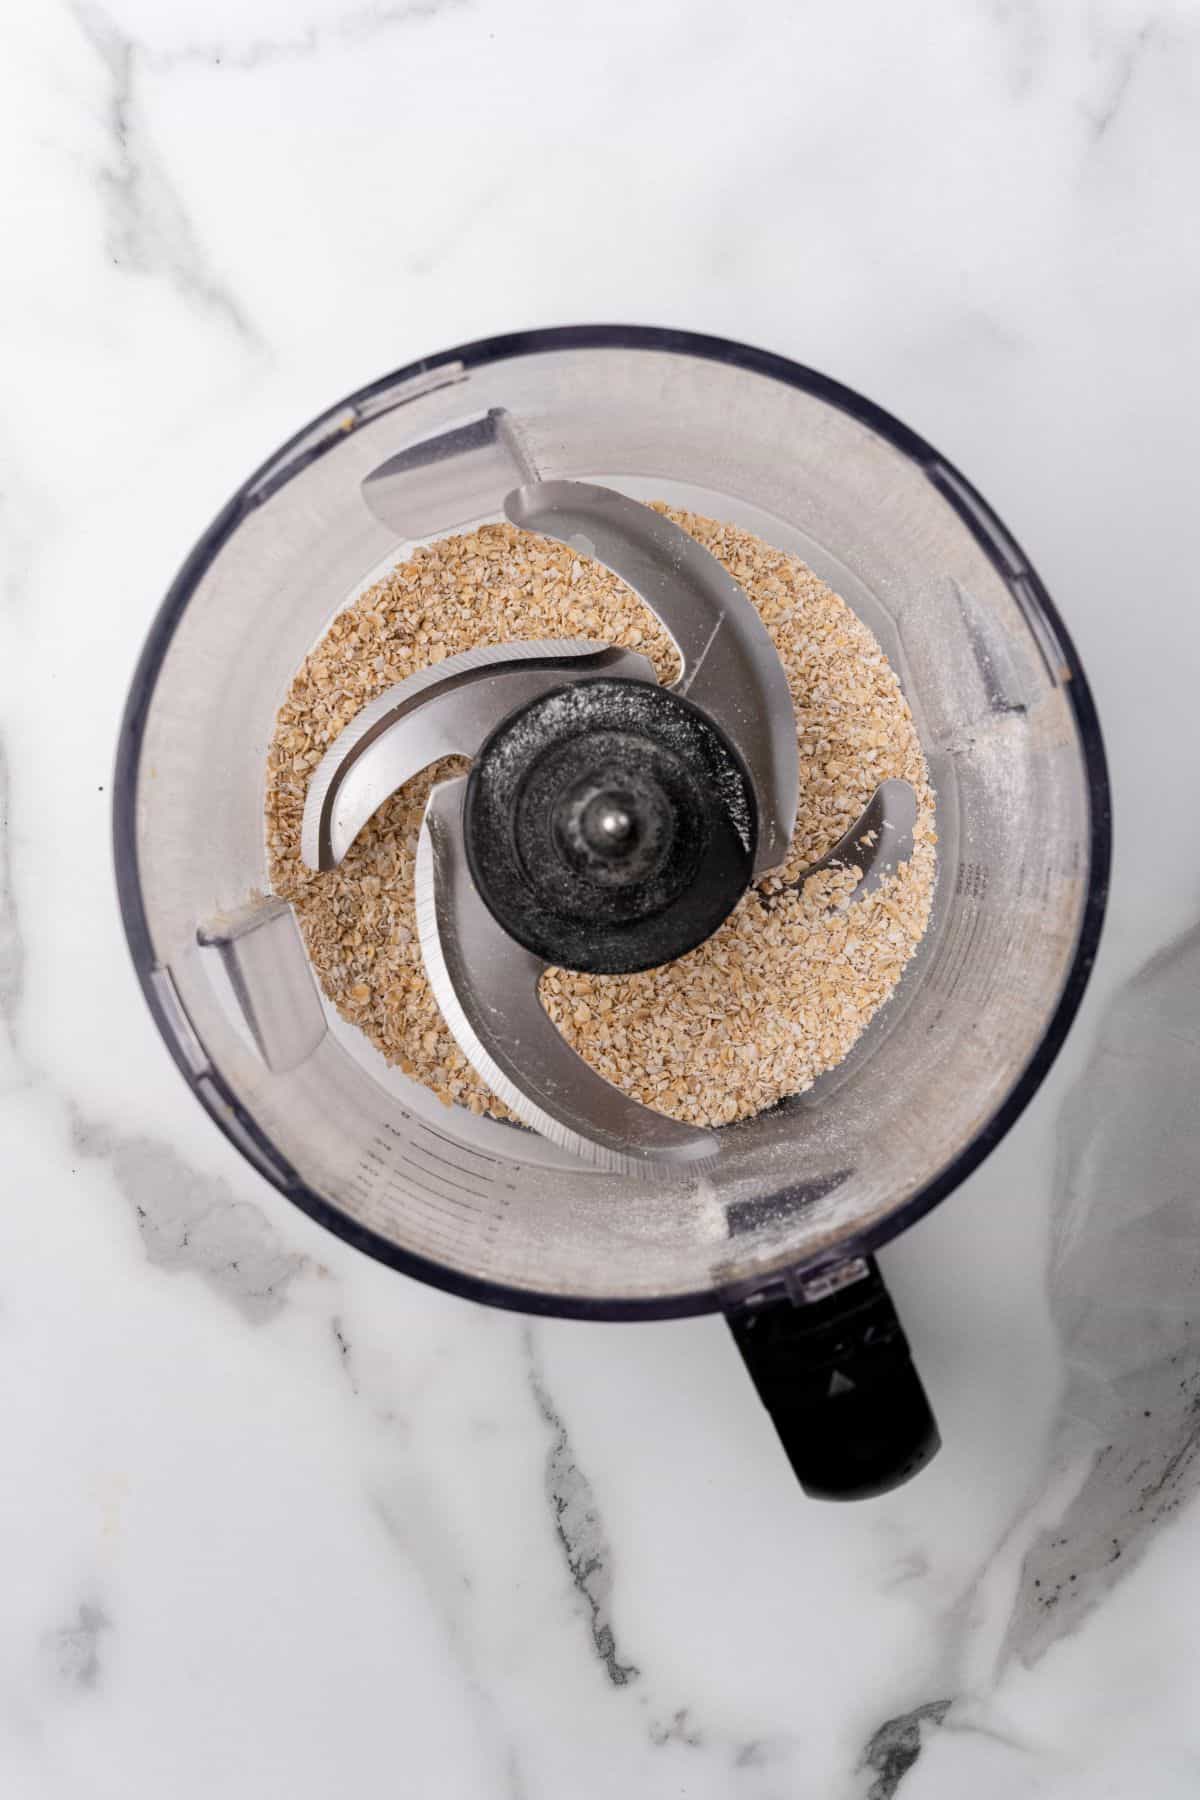 Oats being blended down into a fine powder in a blender. 